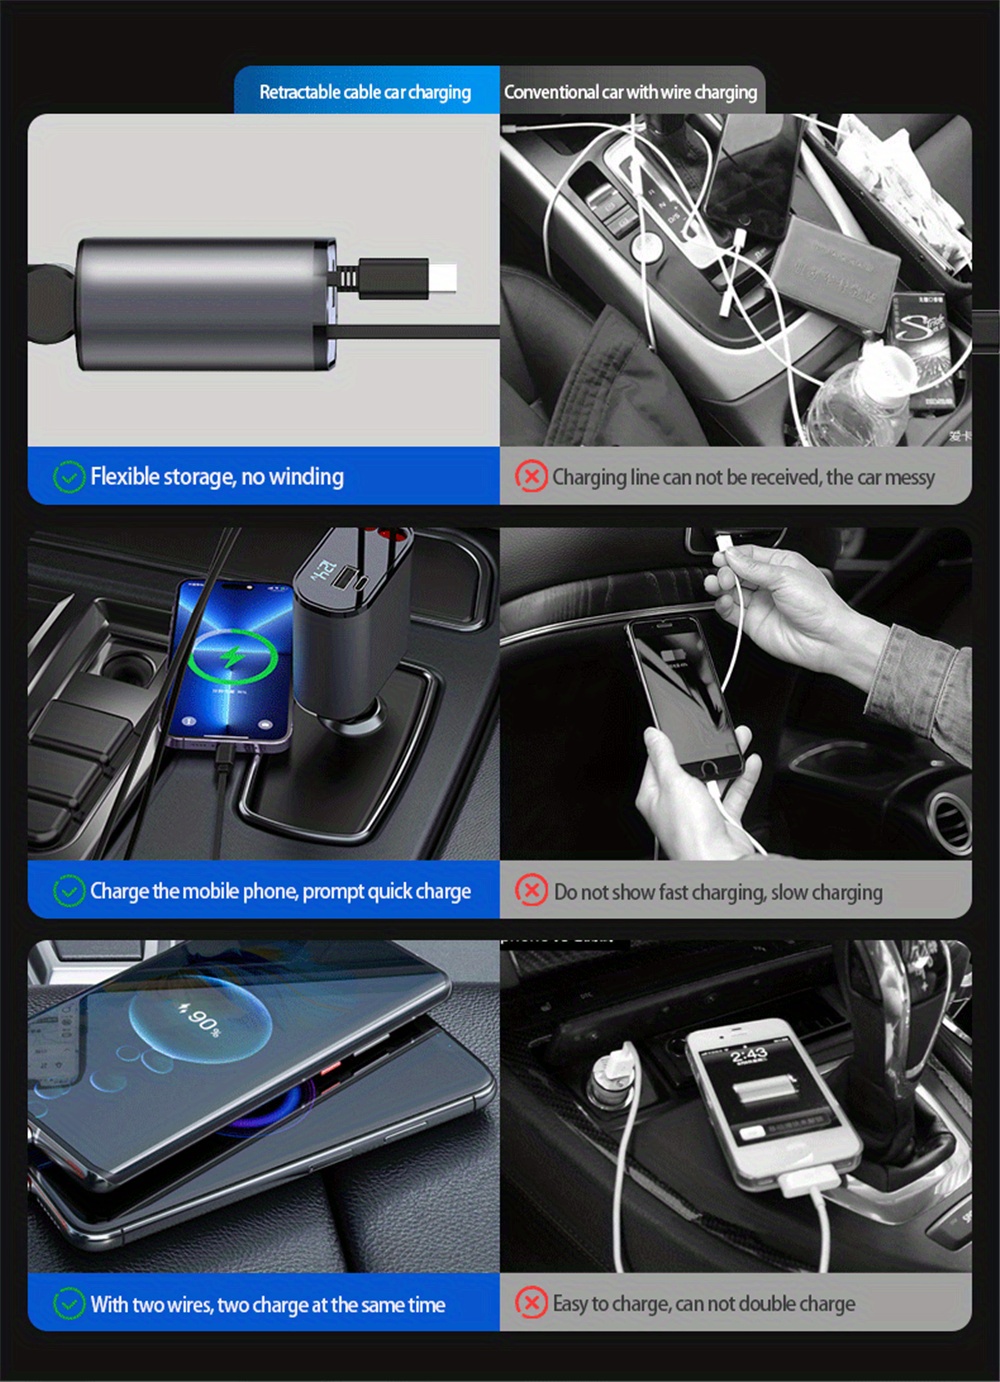 100w 4 in 1 car charger comes with retractable cable digital display fast charging usb type c for iphone xiaomi samsung adjustable cord cigarette lighter adapter details 4